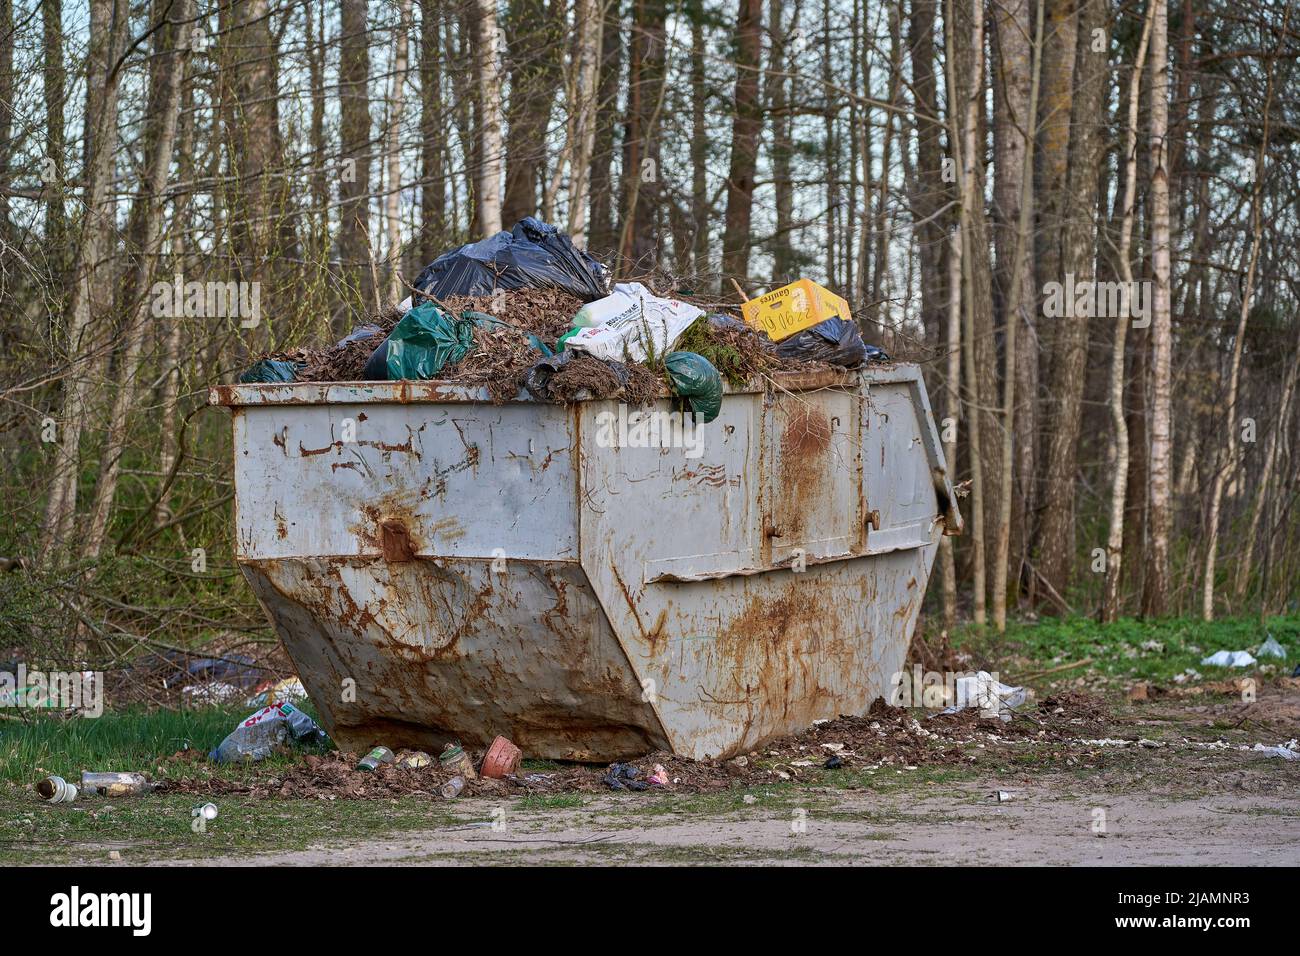 Big Garbage Container Stock Photo by ©Colour 160824482